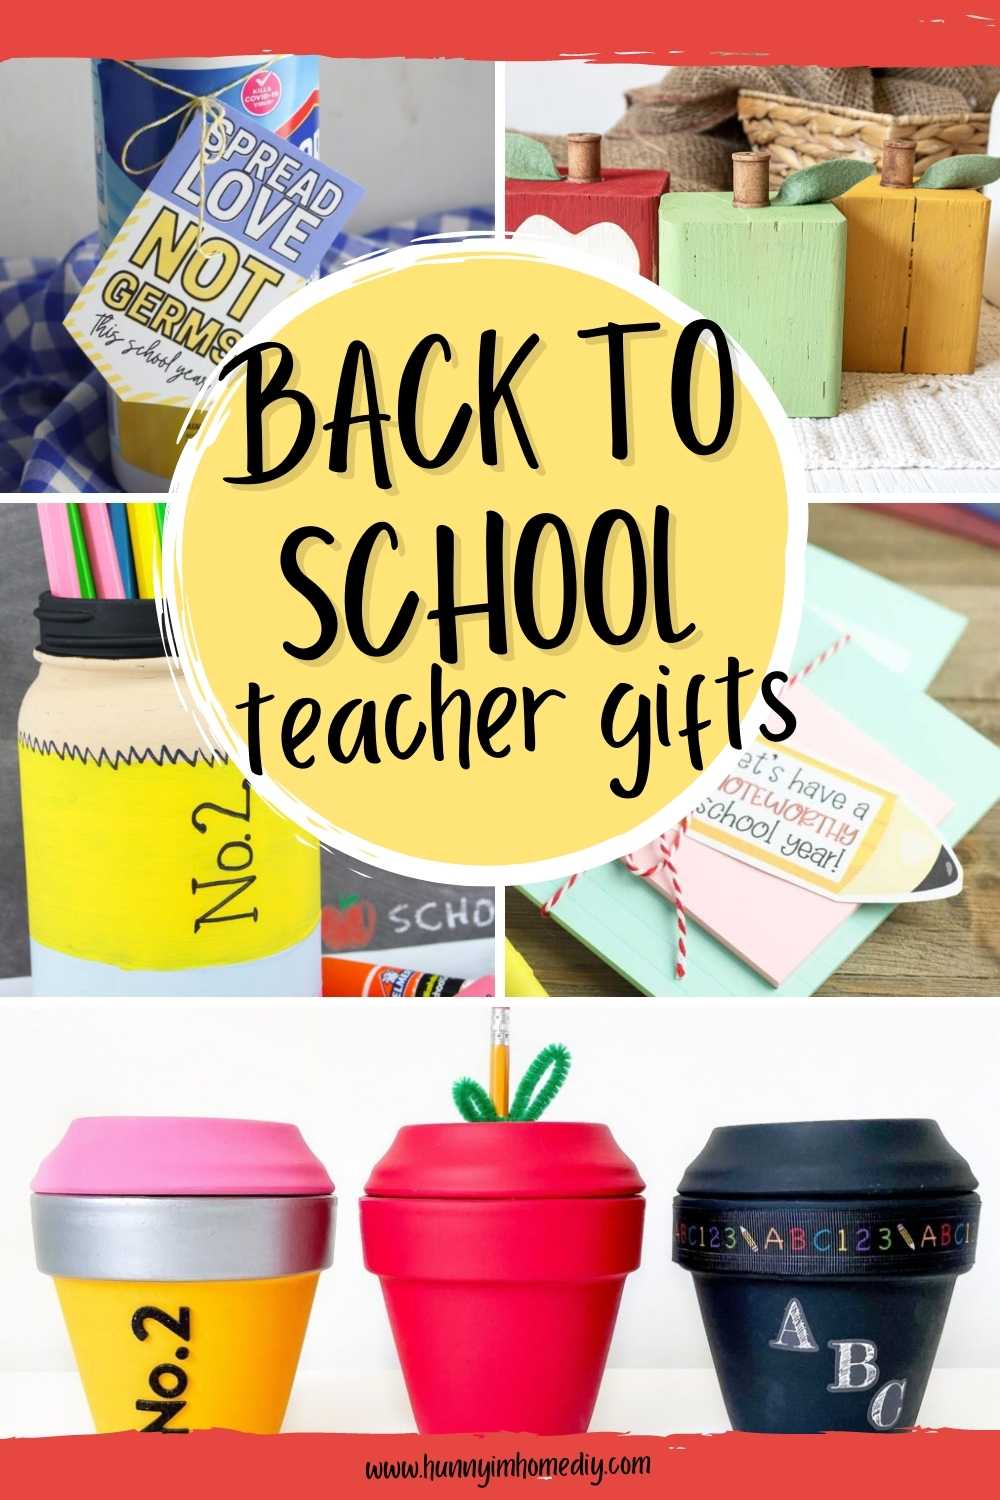 34 Amazing DIY Back to School Teacher Gifts and Printable Gift Tags